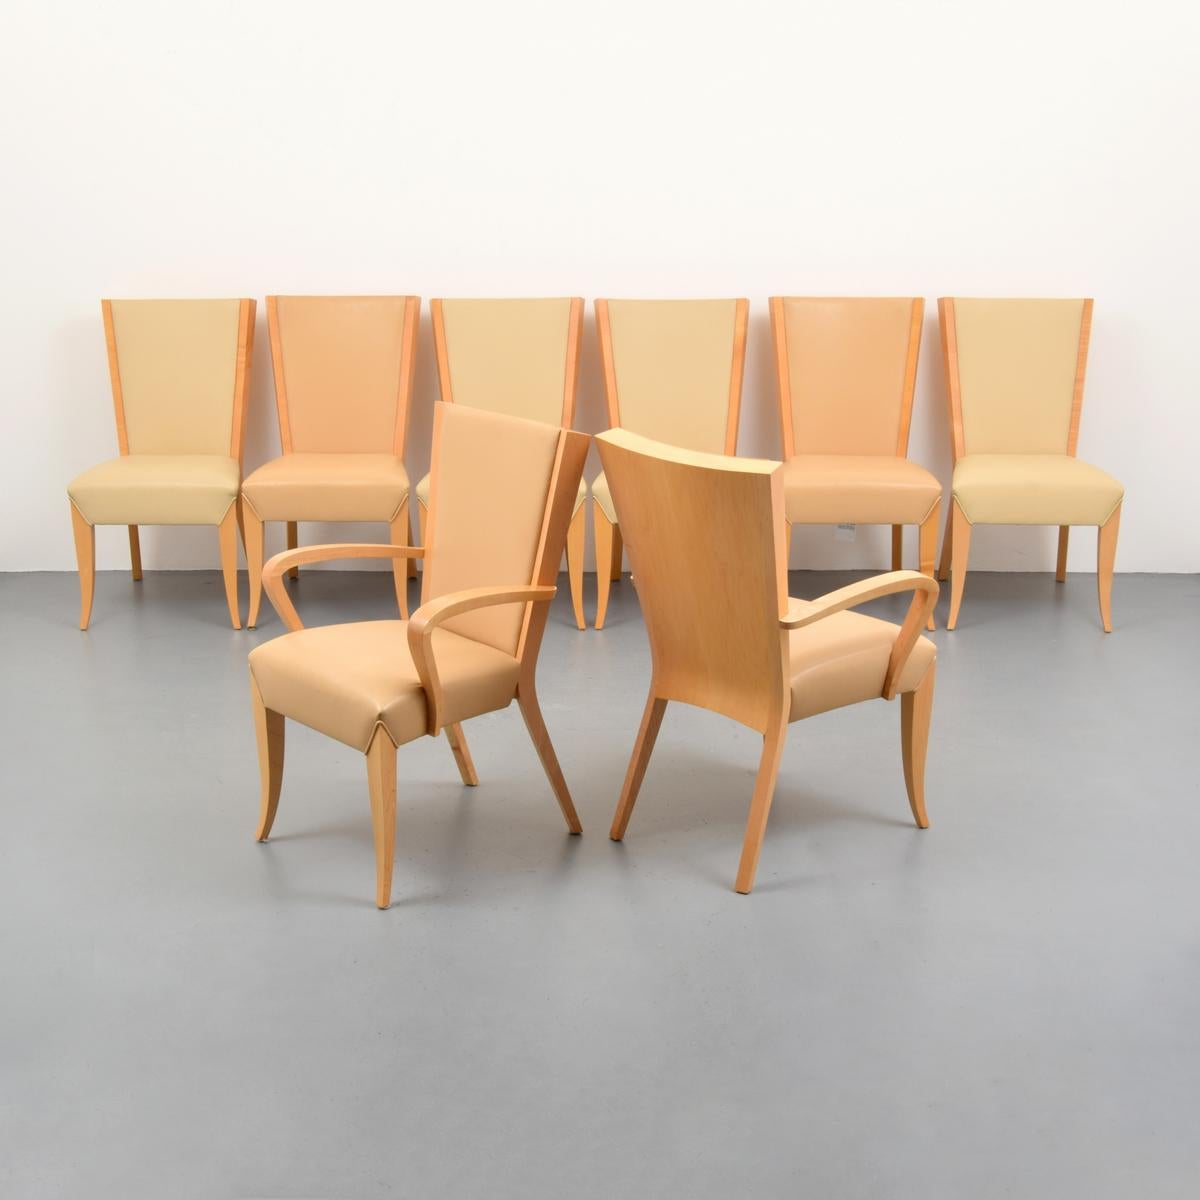 Set includes two armchairs and six side chairs. 

Markings: Dakota Jackson label

Dimensions (H, W, D): armchairs: 38